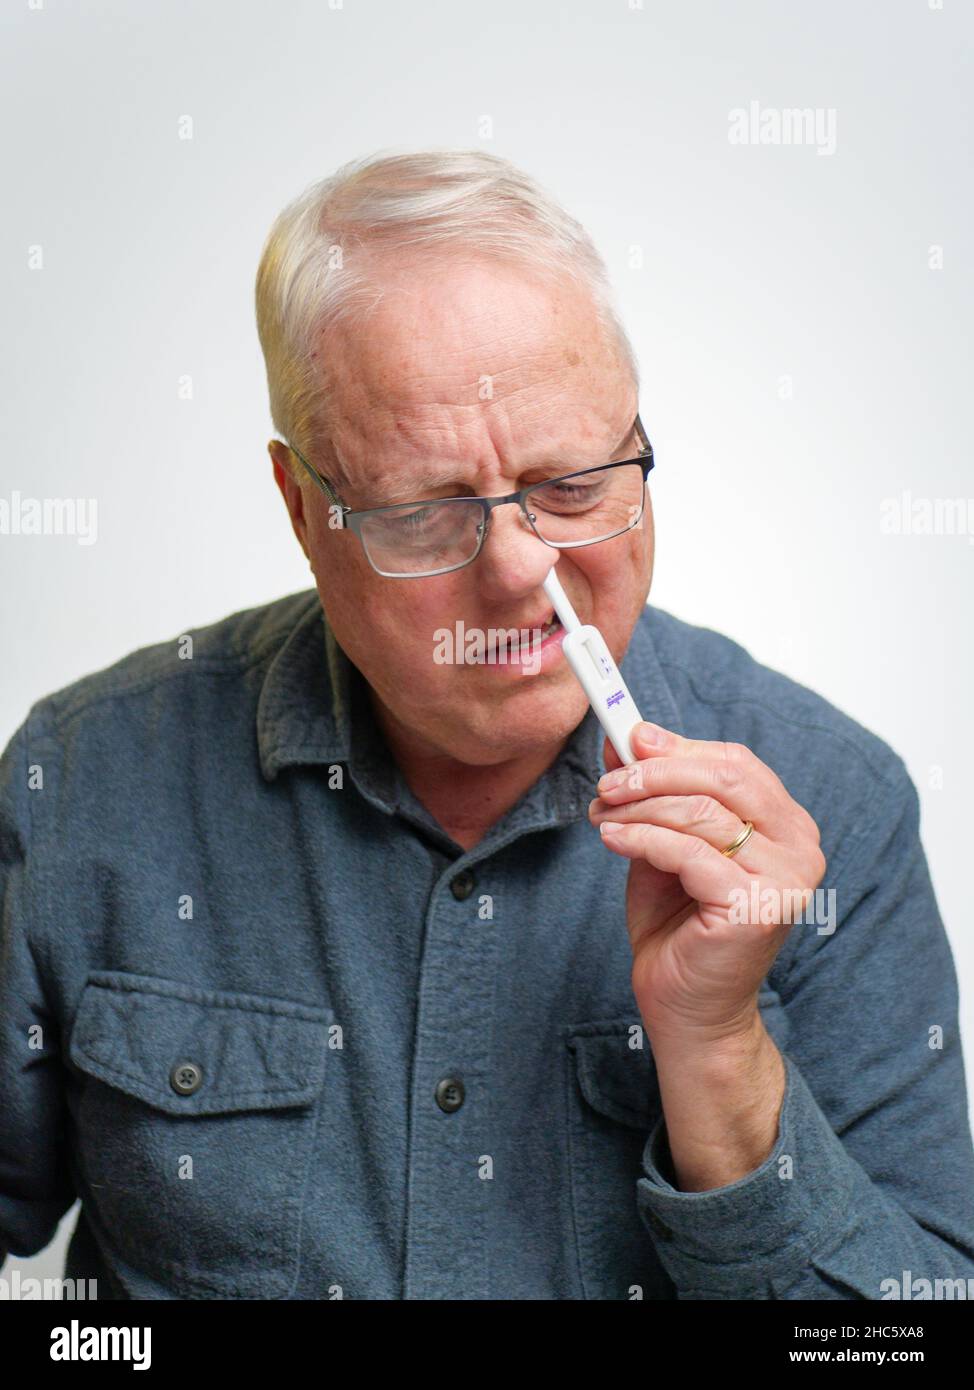 Man swabbing nostril with COVID-19 home antigen test kit. Stock Photo